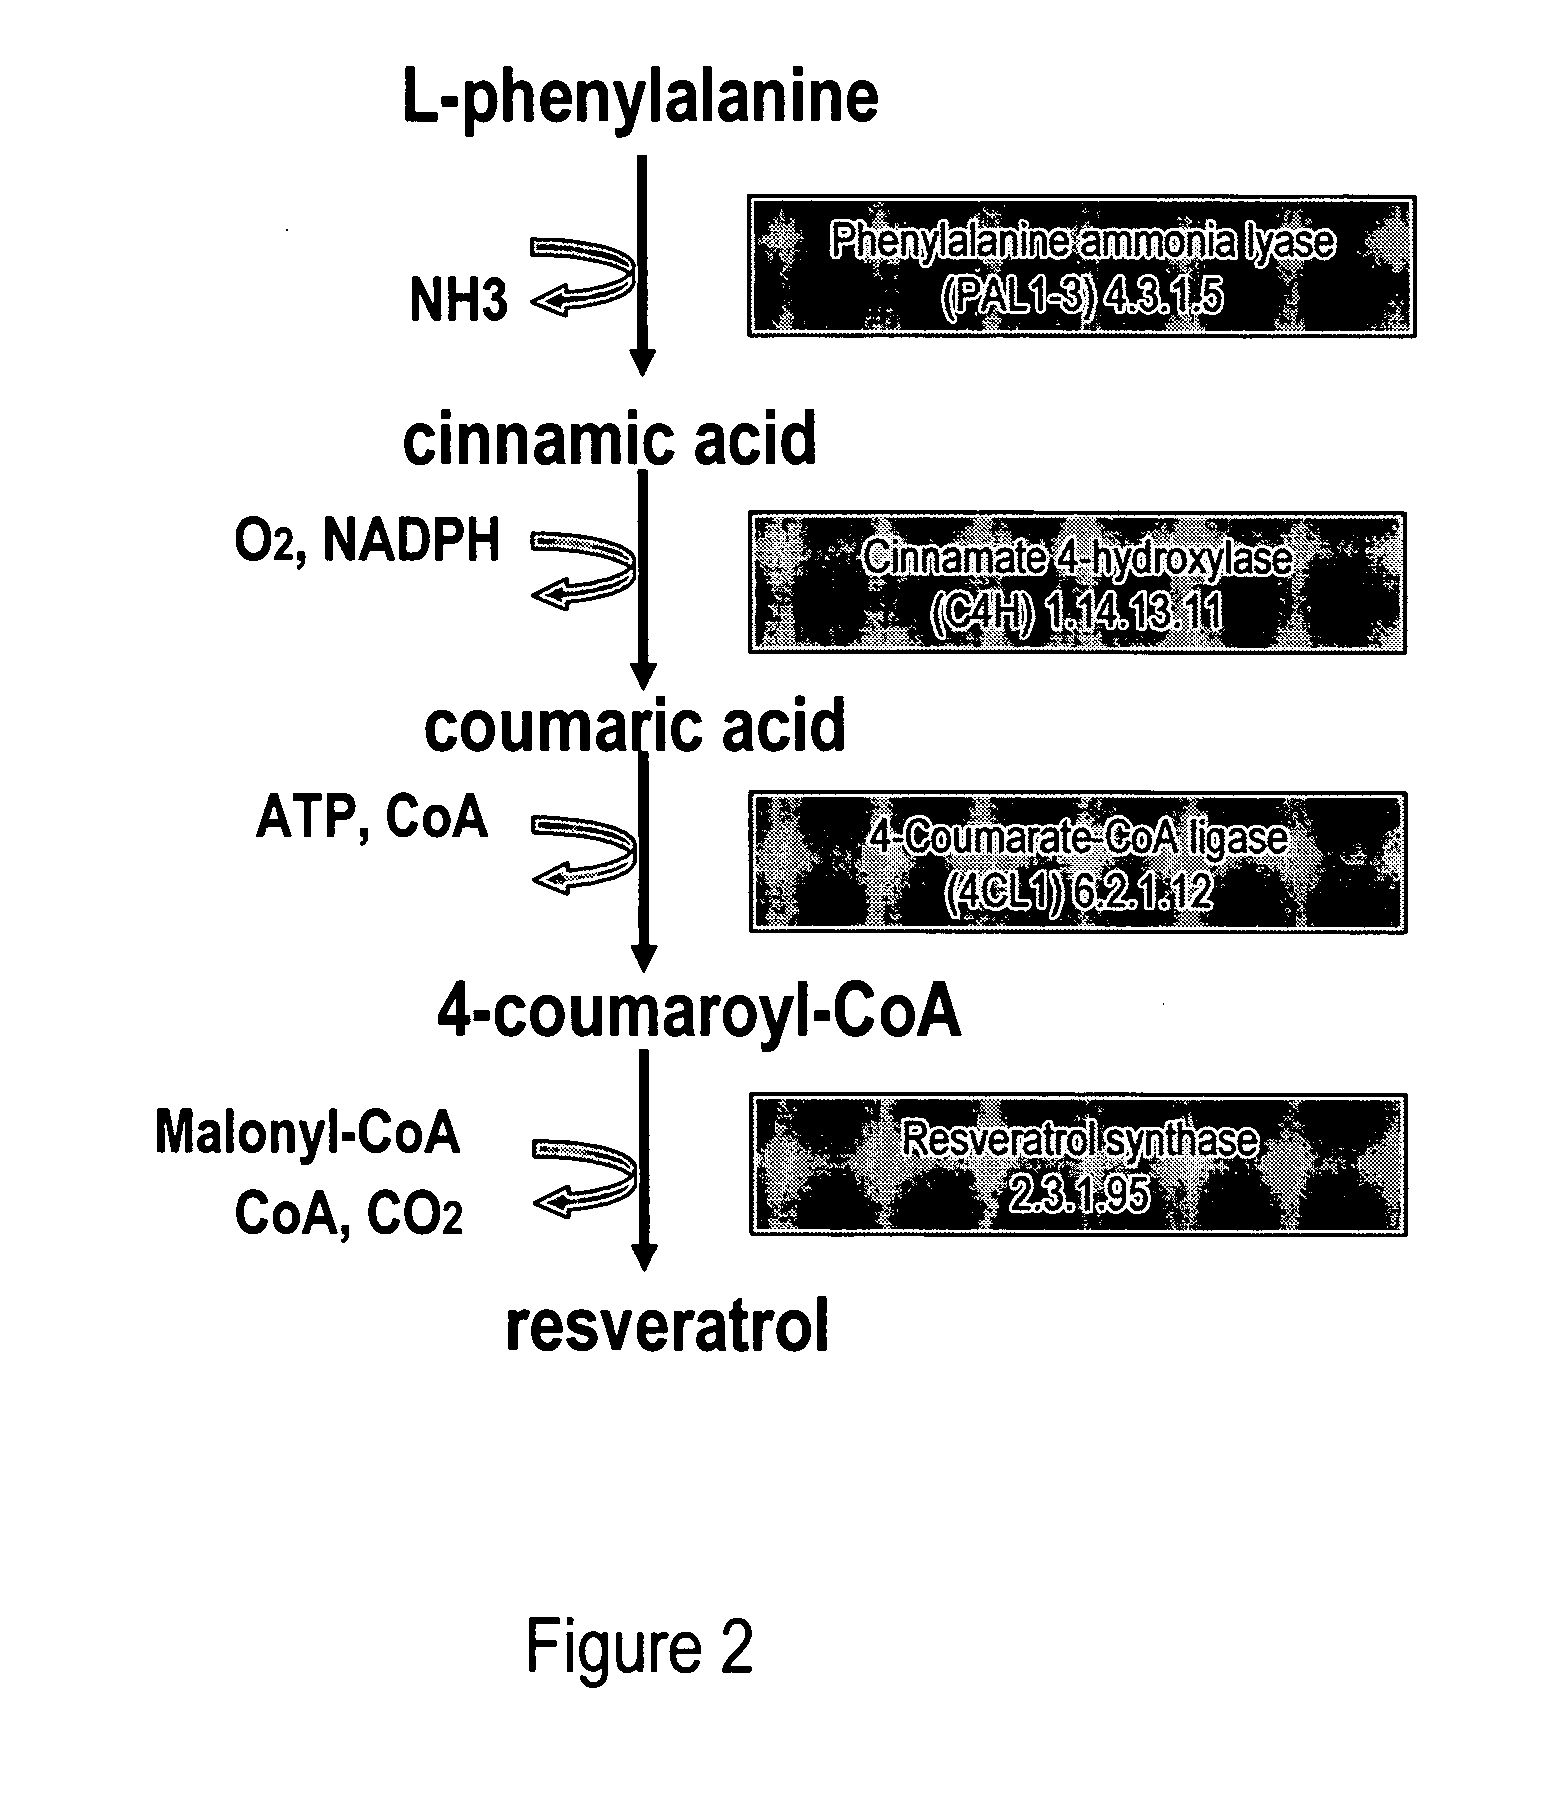 Metabolically engineered cells for the production of resveratrol or an oligomeric or glycosidically-bound derivative thereof